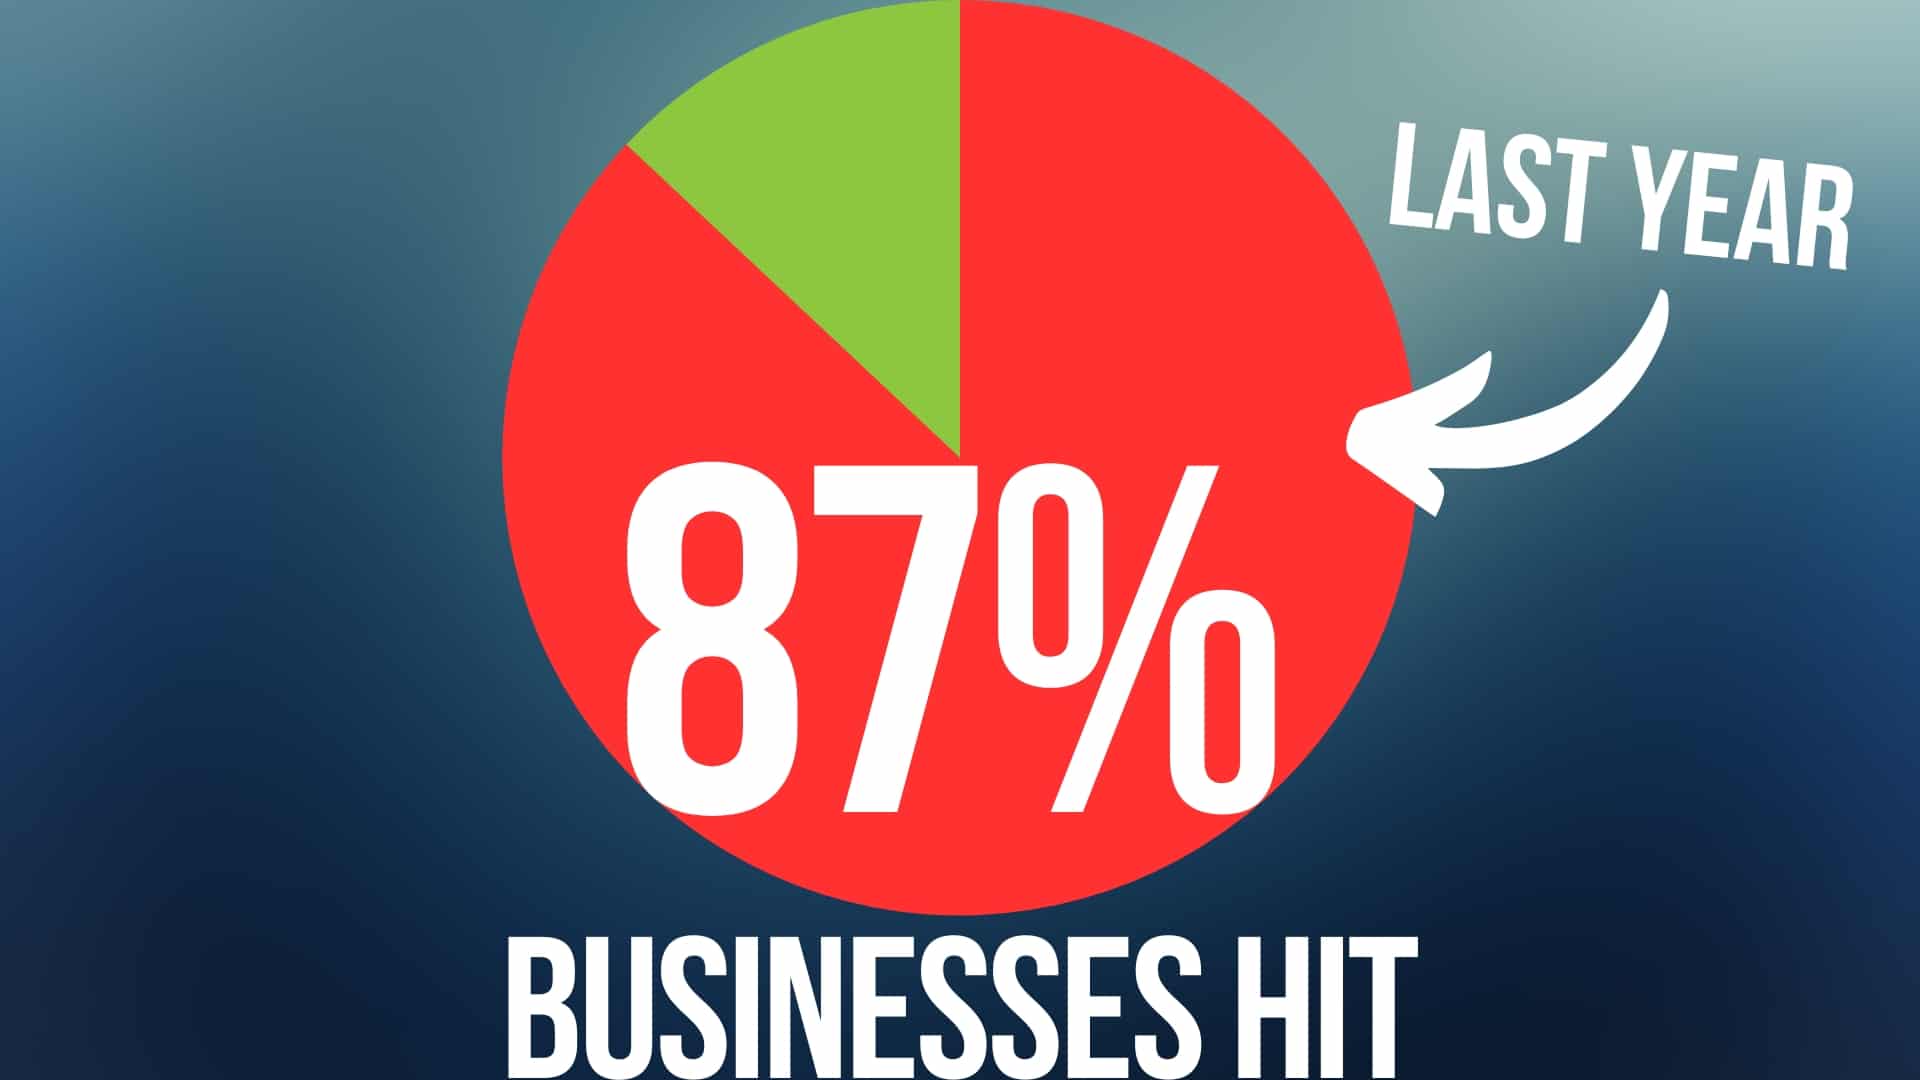 87% of businesses hit by this in the last year